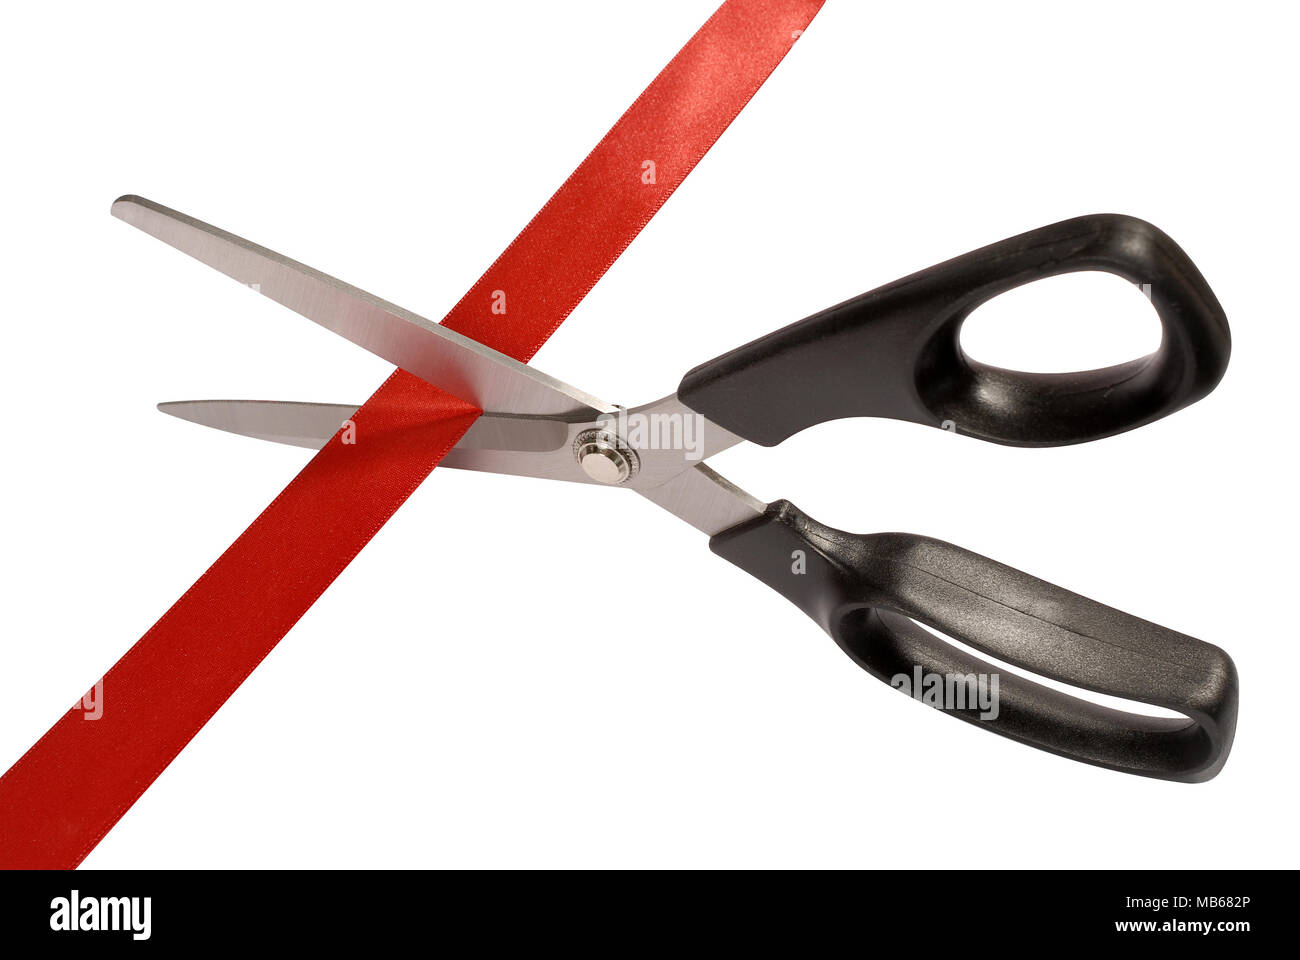 Ribbon and Scissors on White Background Stock Photo - Image of